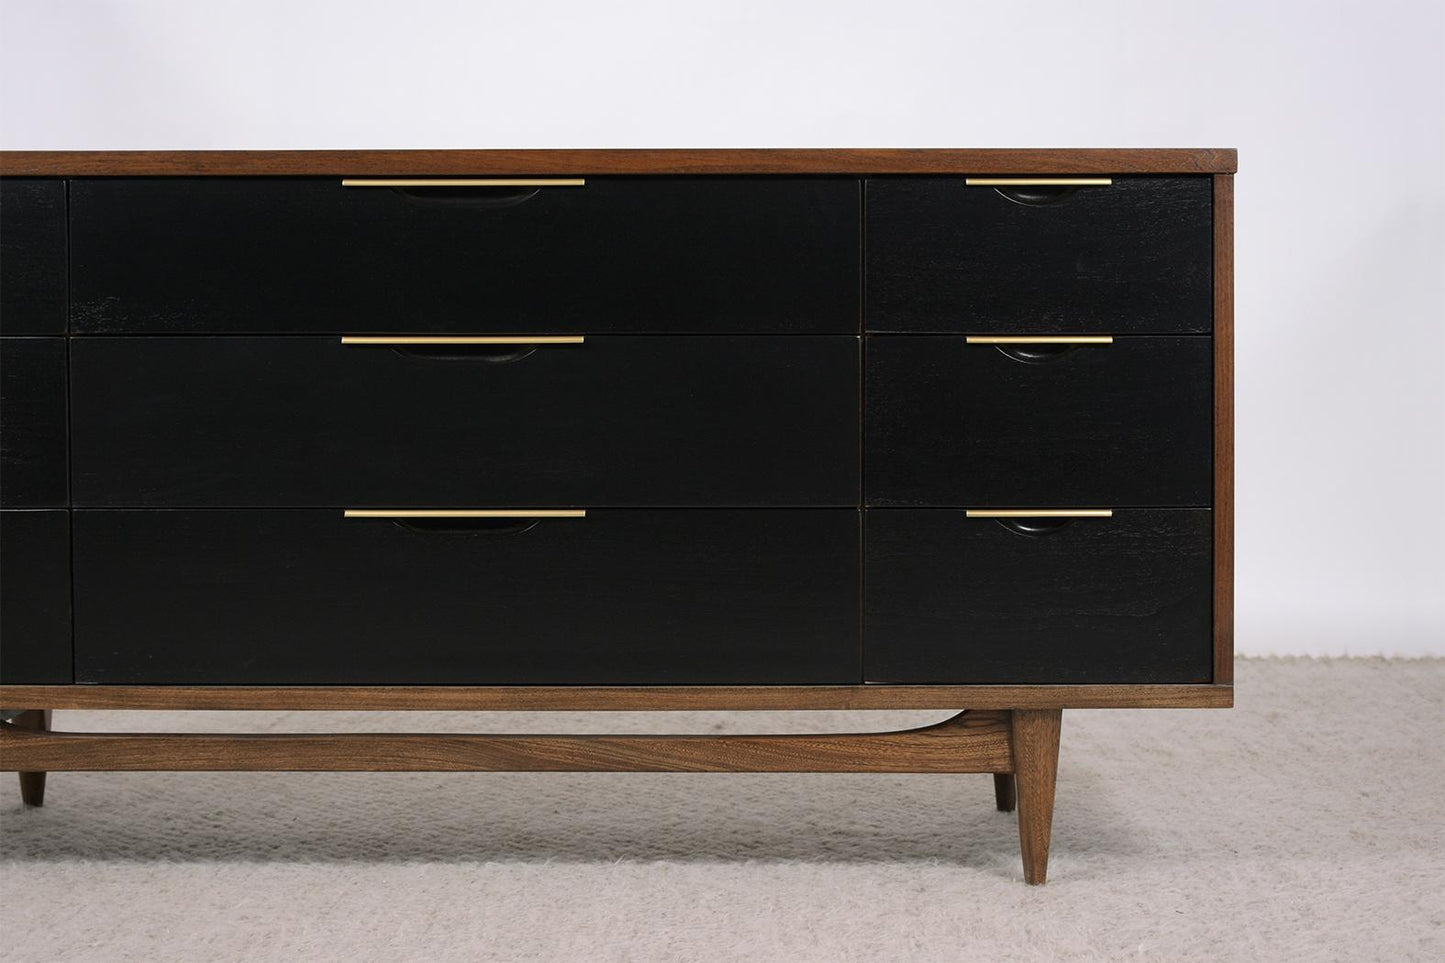 Vintage Mid-Century Modern Chest of Drawers